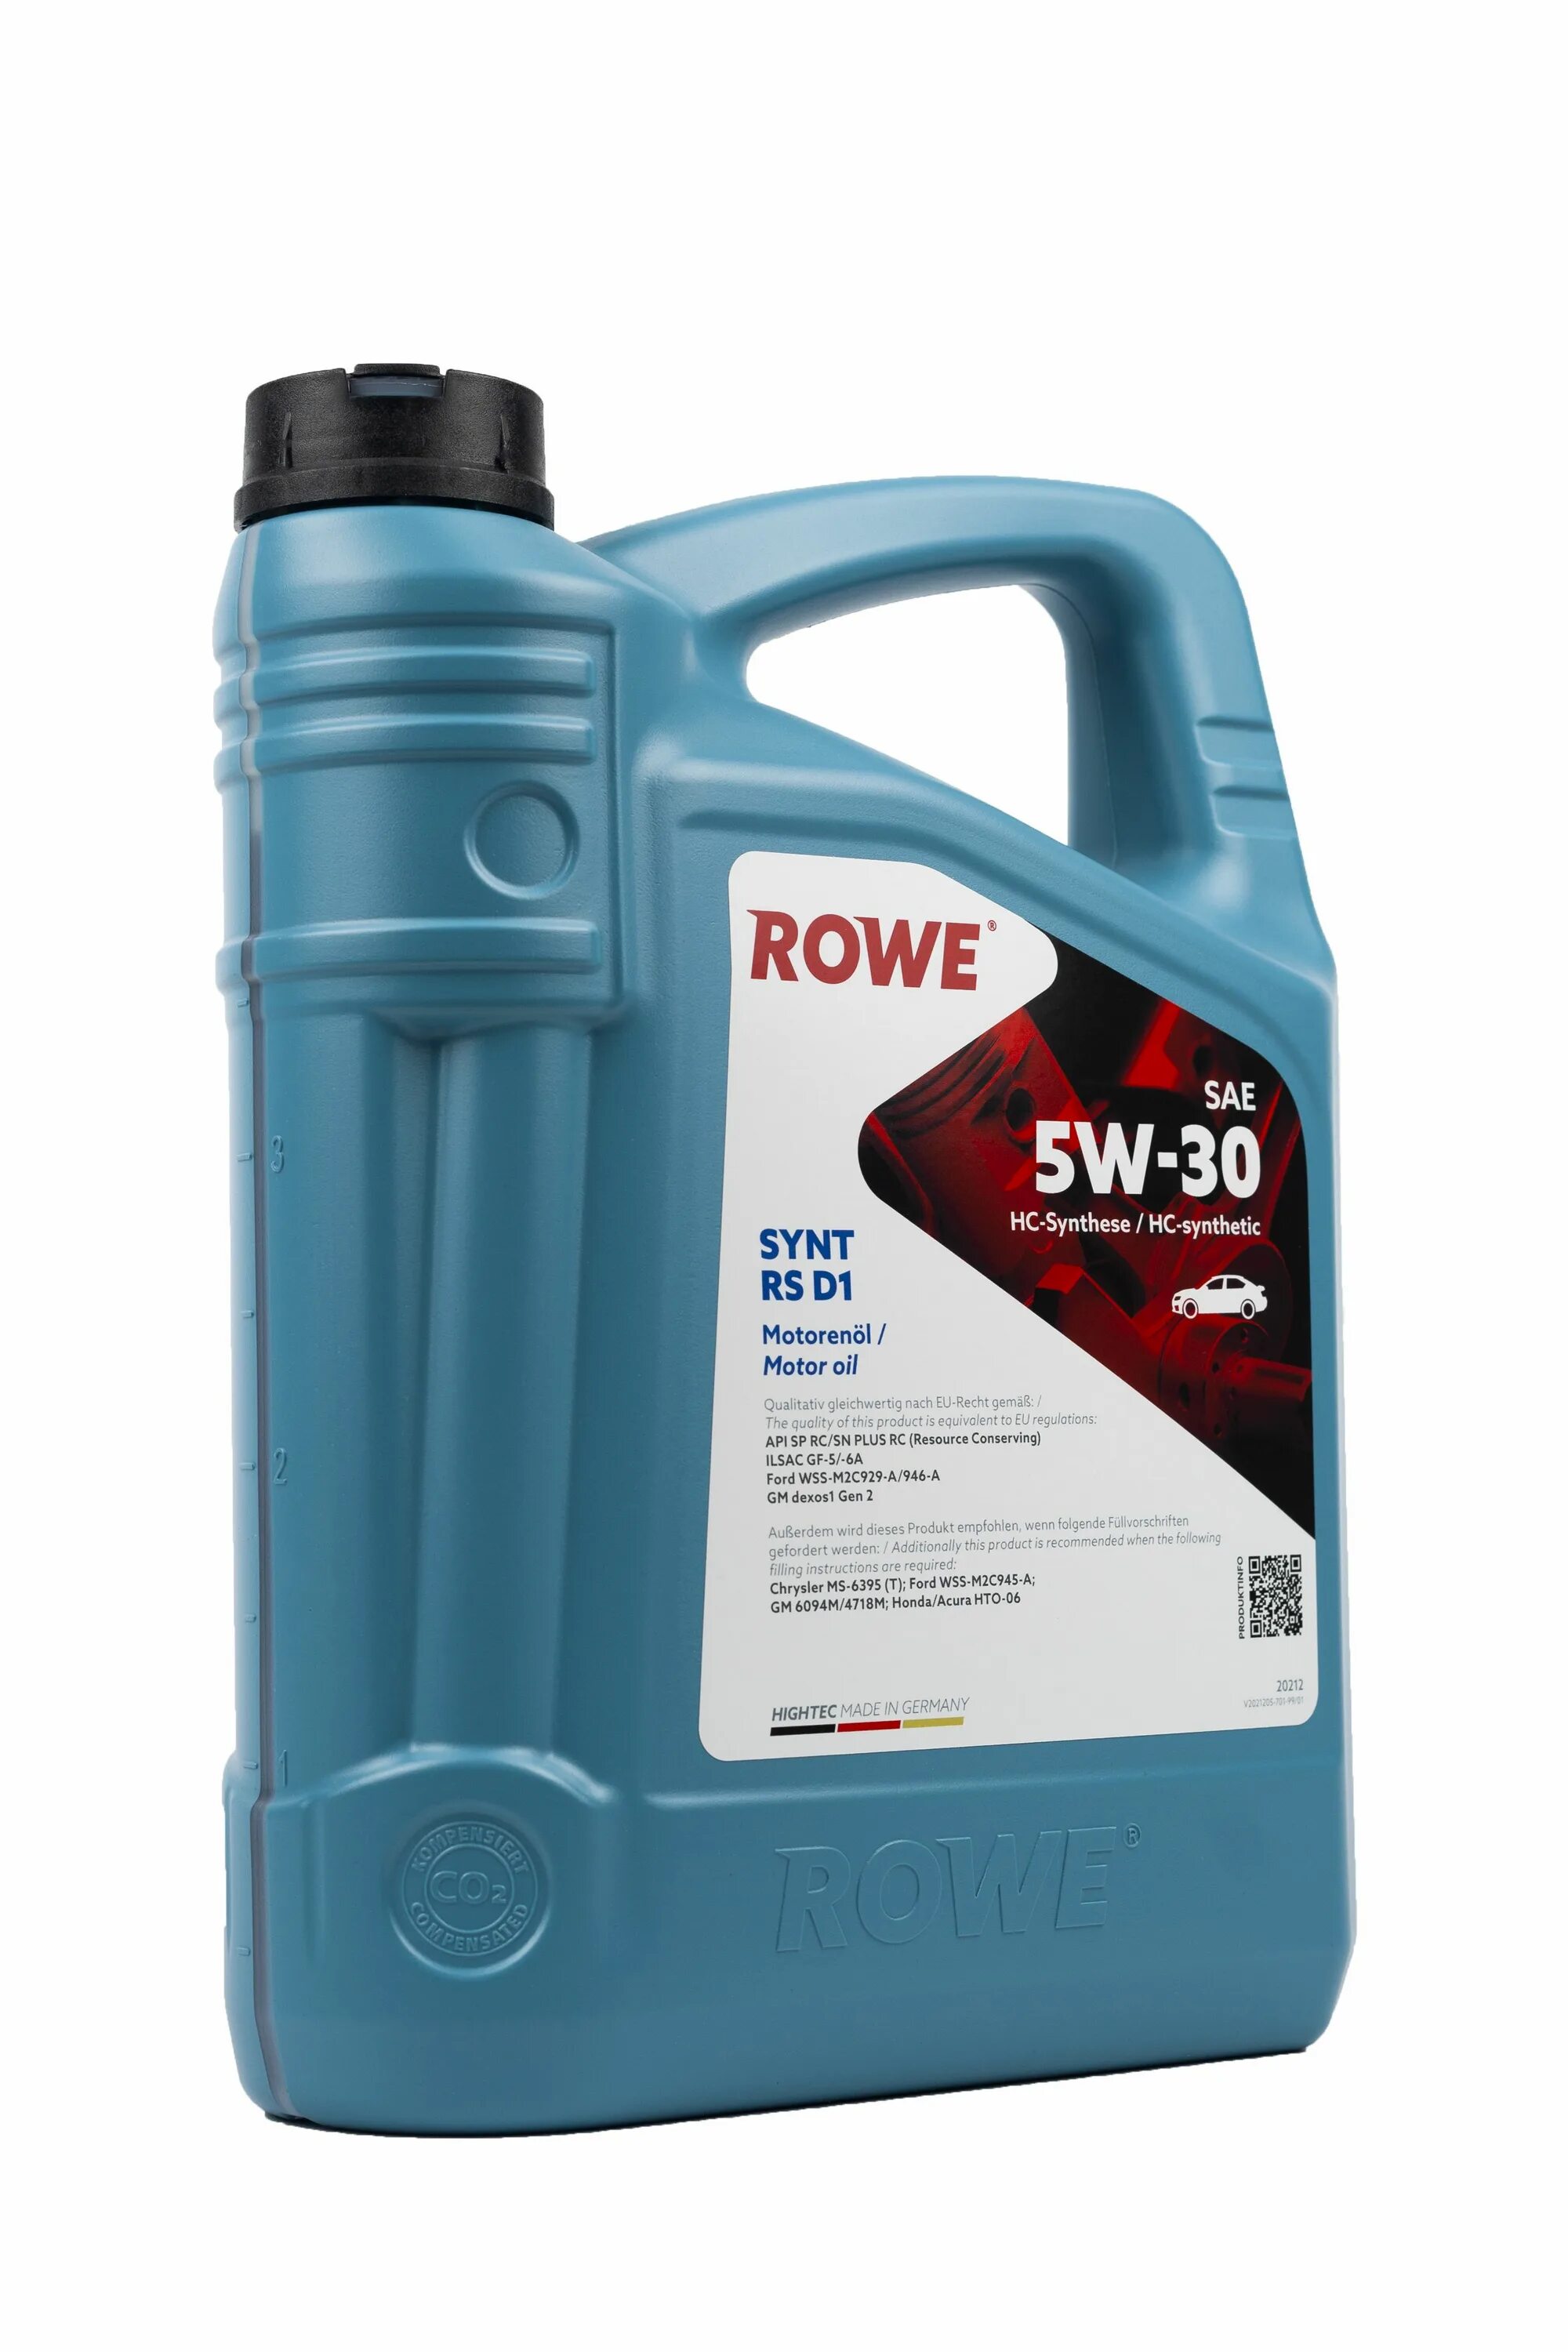 Масло rowe rs. Rowe 5w30 Synt. Synt RS d1 5w-30 Rowe. Rowe 5w30 Ford. Hightec Synt RS d1 SAE 5w-30.